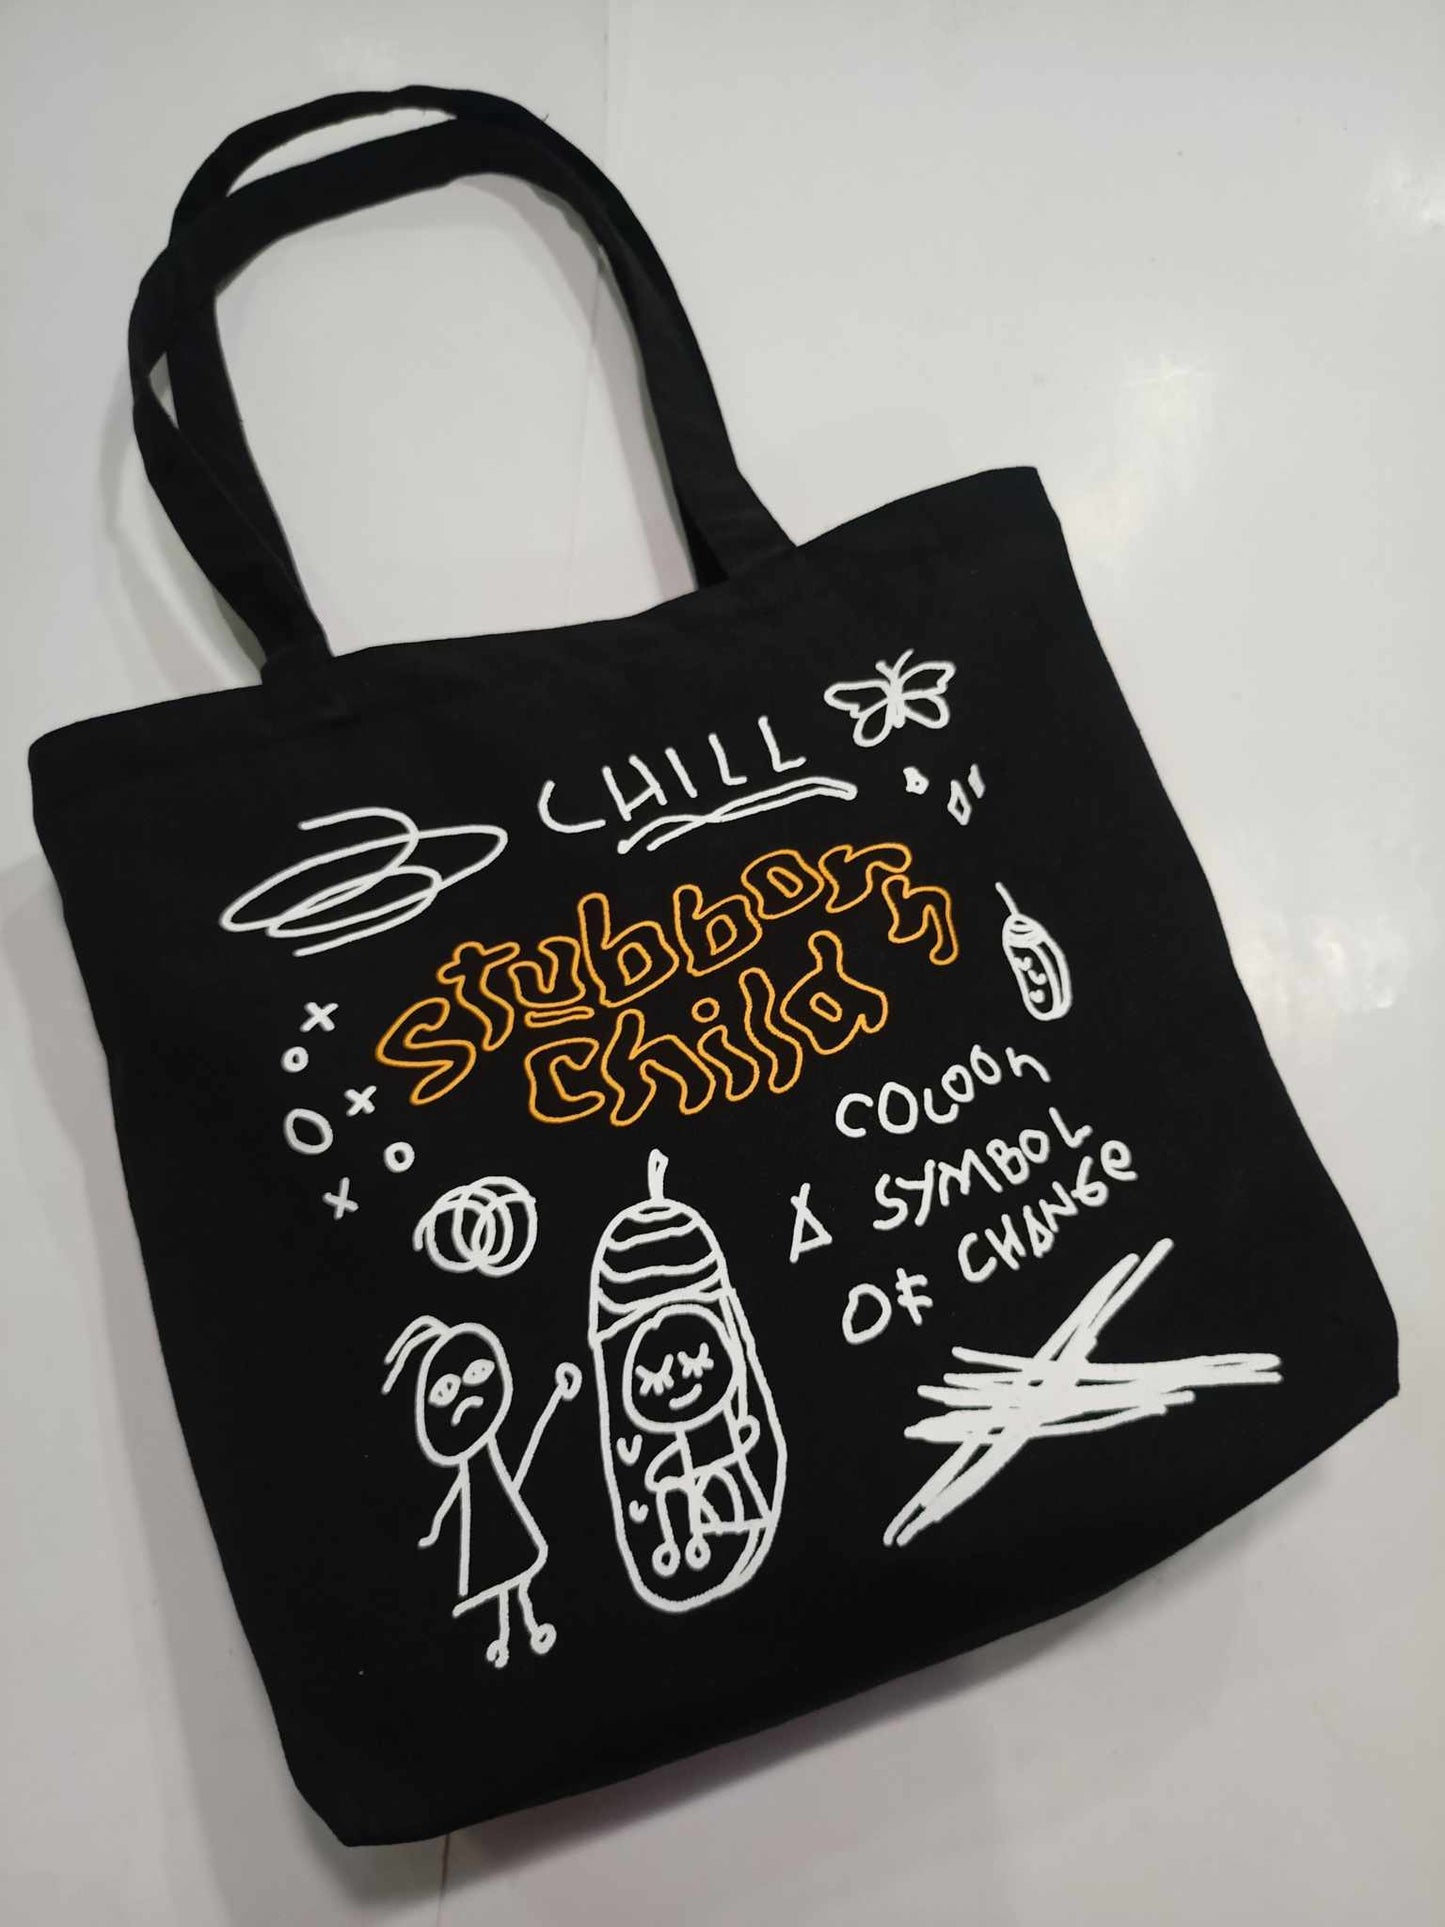 Stubborn Child Tote Bag | New and Improved!